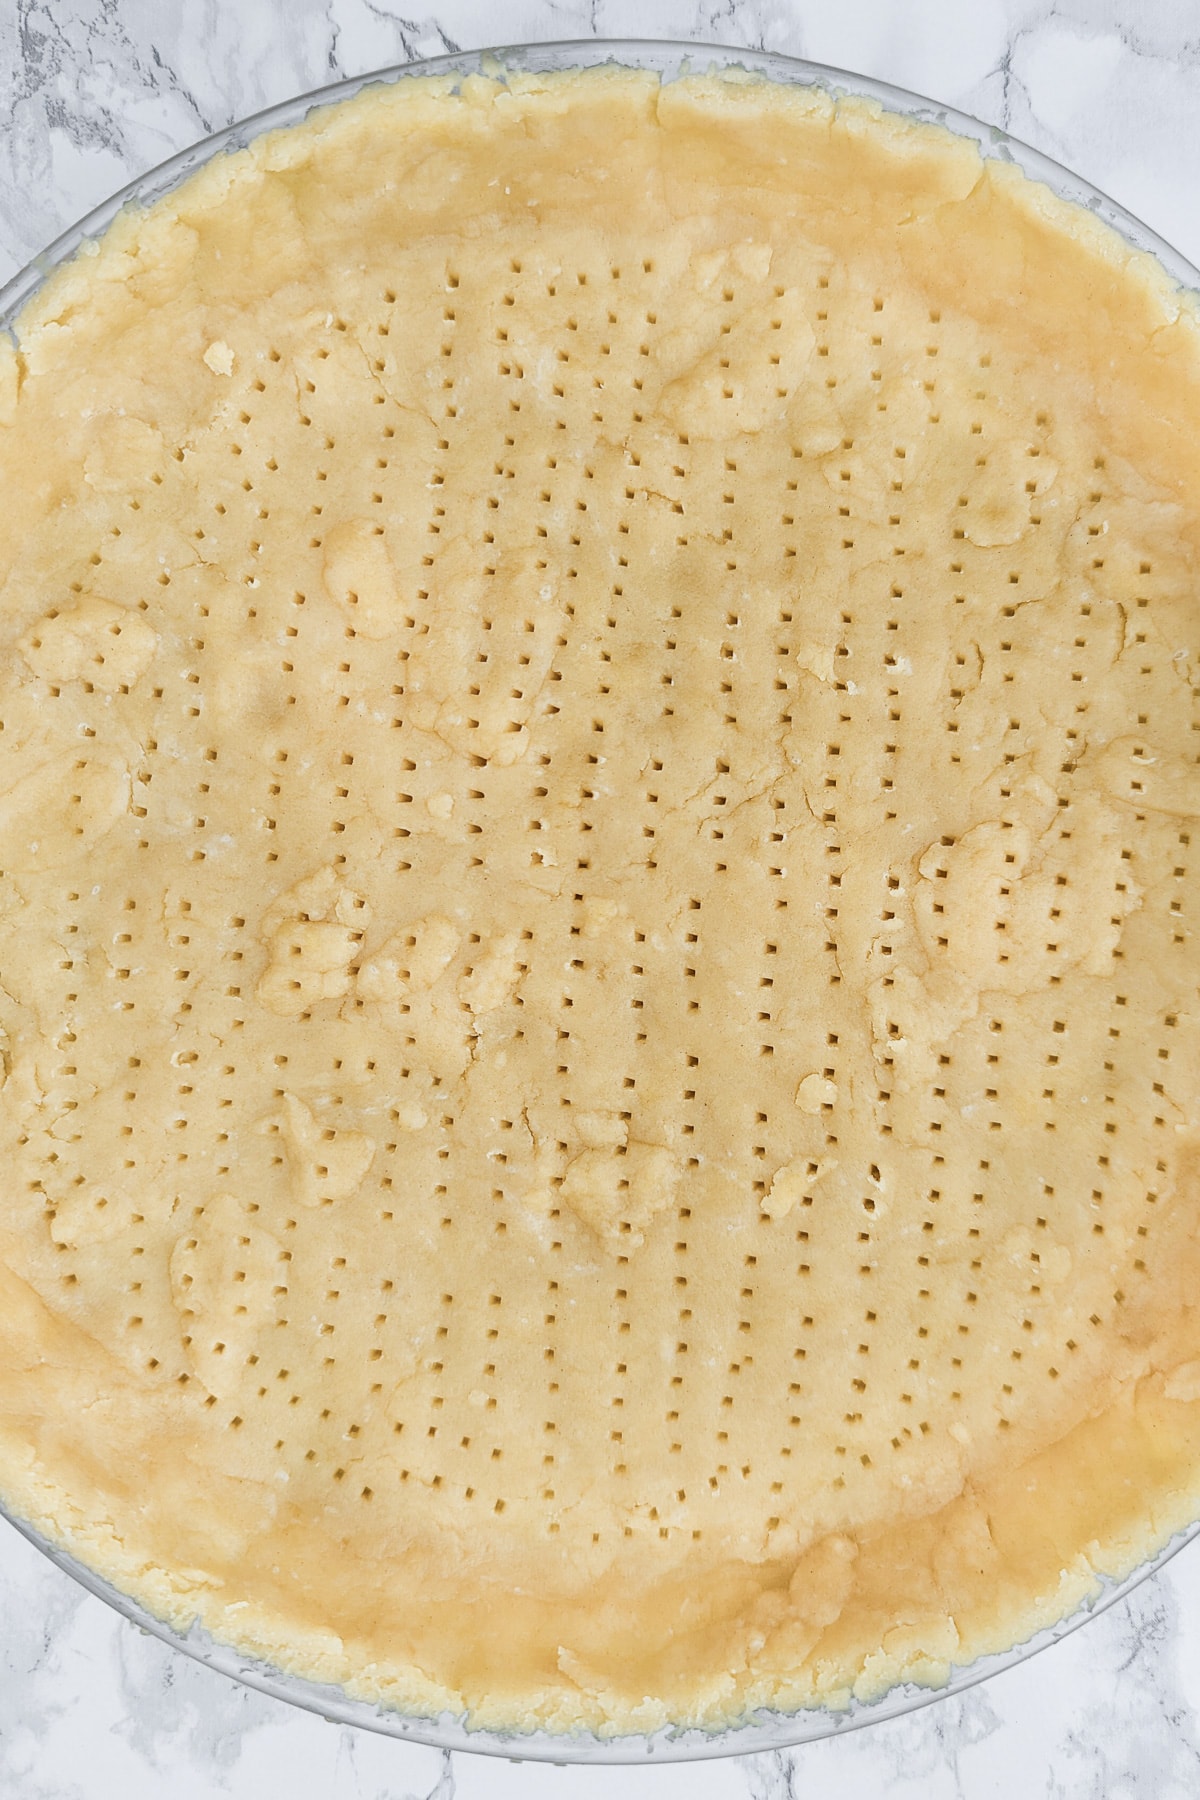 Top view of a perforated dough layered in a transparent baking dish.